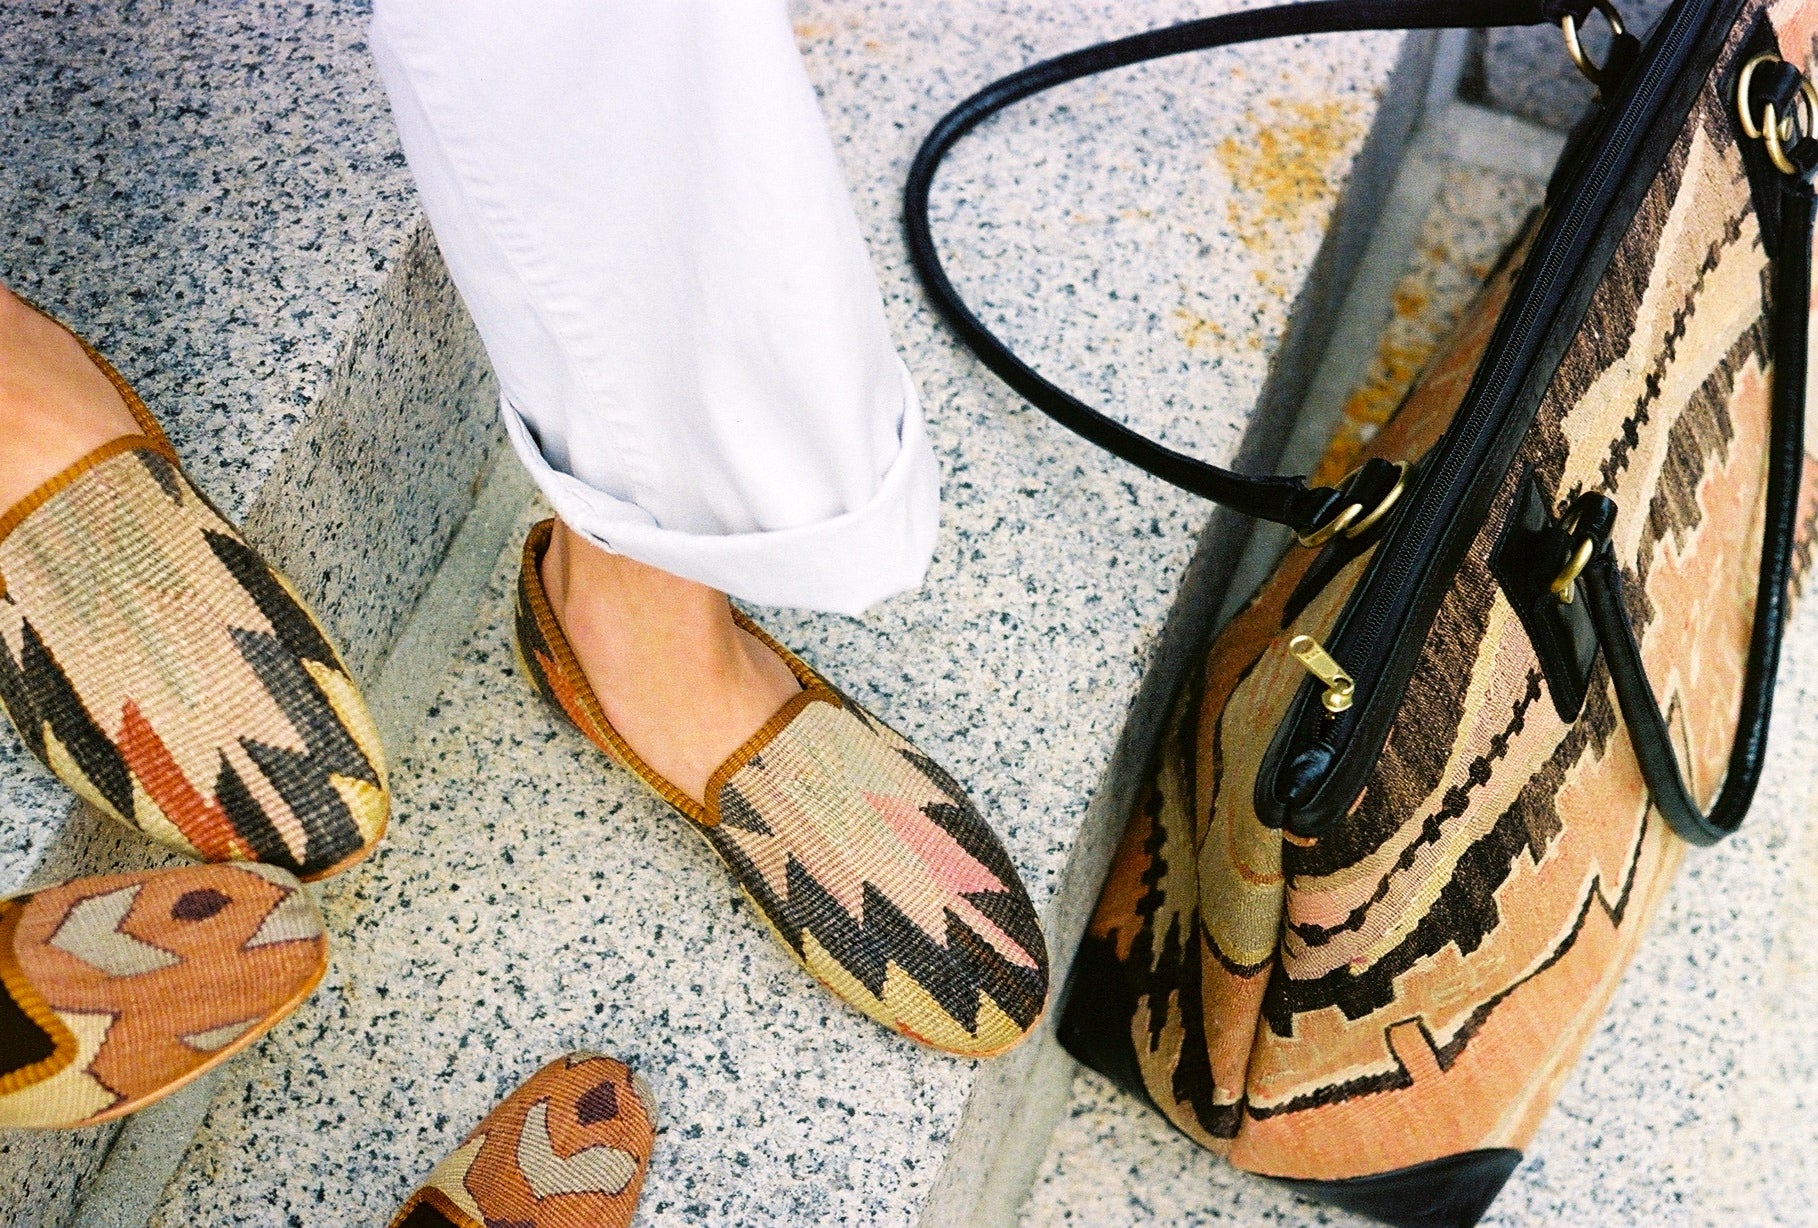 Kilim smoking shoes and bag from Artemis Design Co